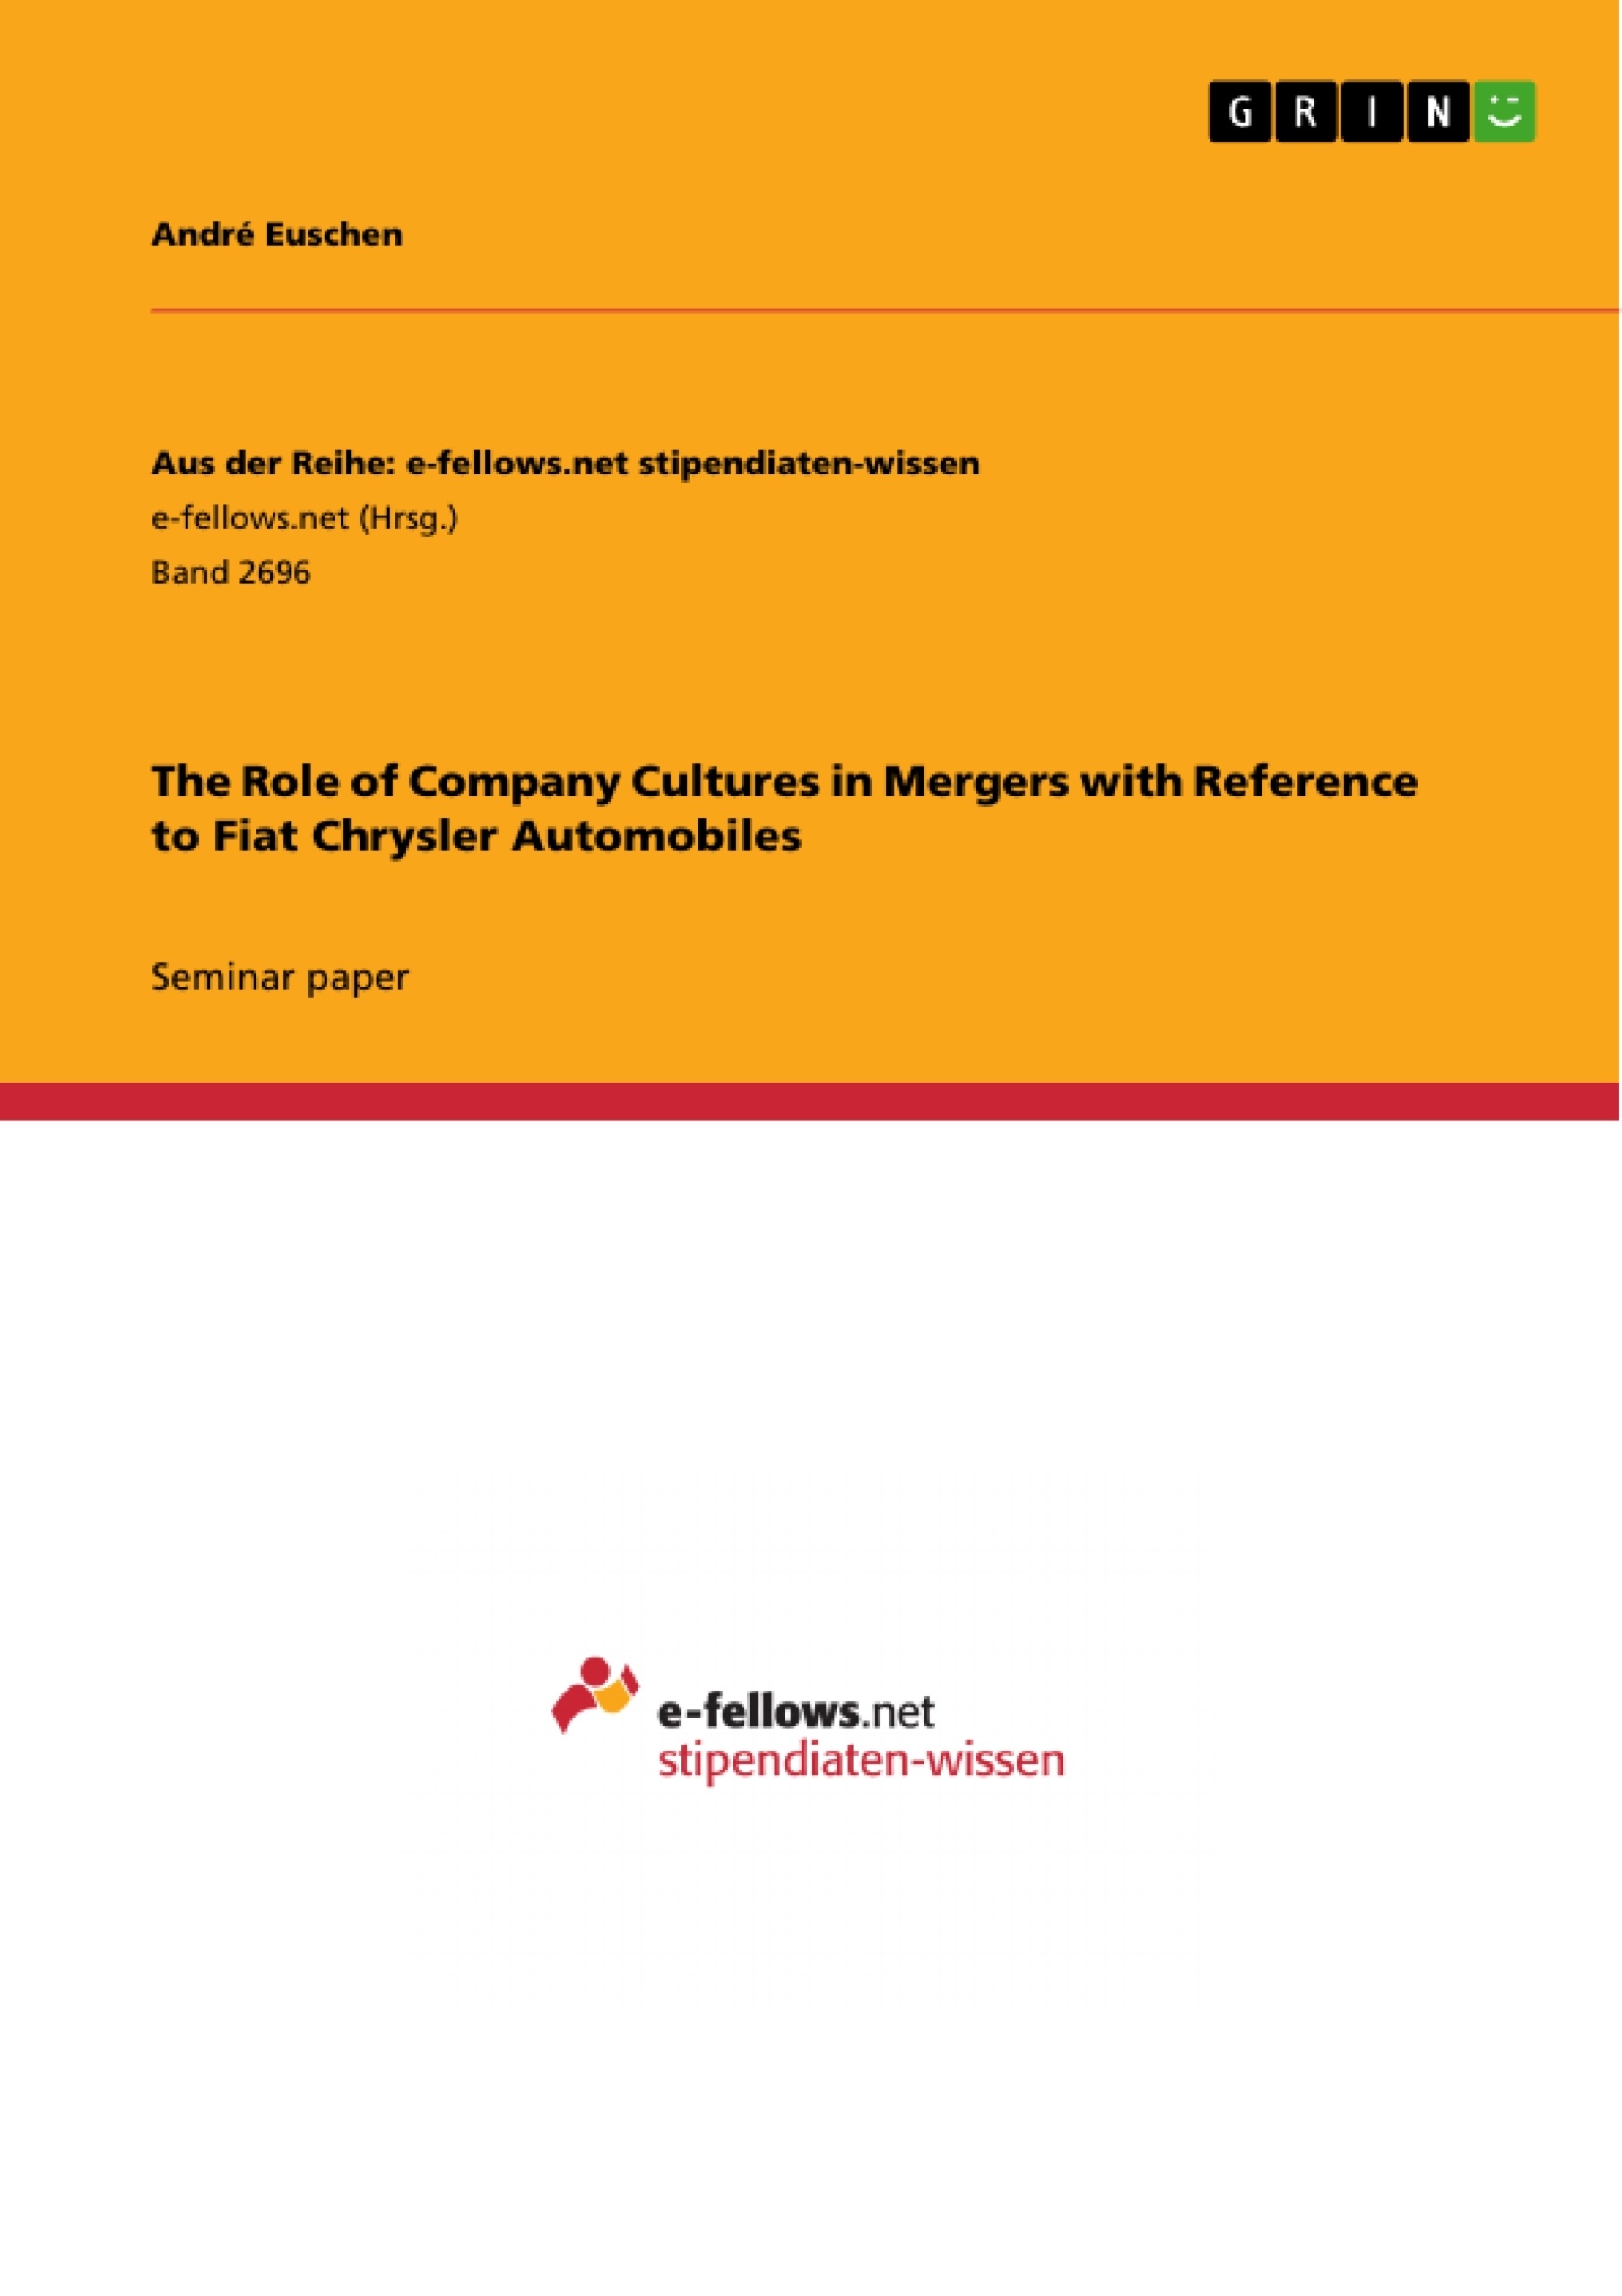 Title: The Role of Company Cultures in Mergers with Reference to Fiat Chrysler Automobiles